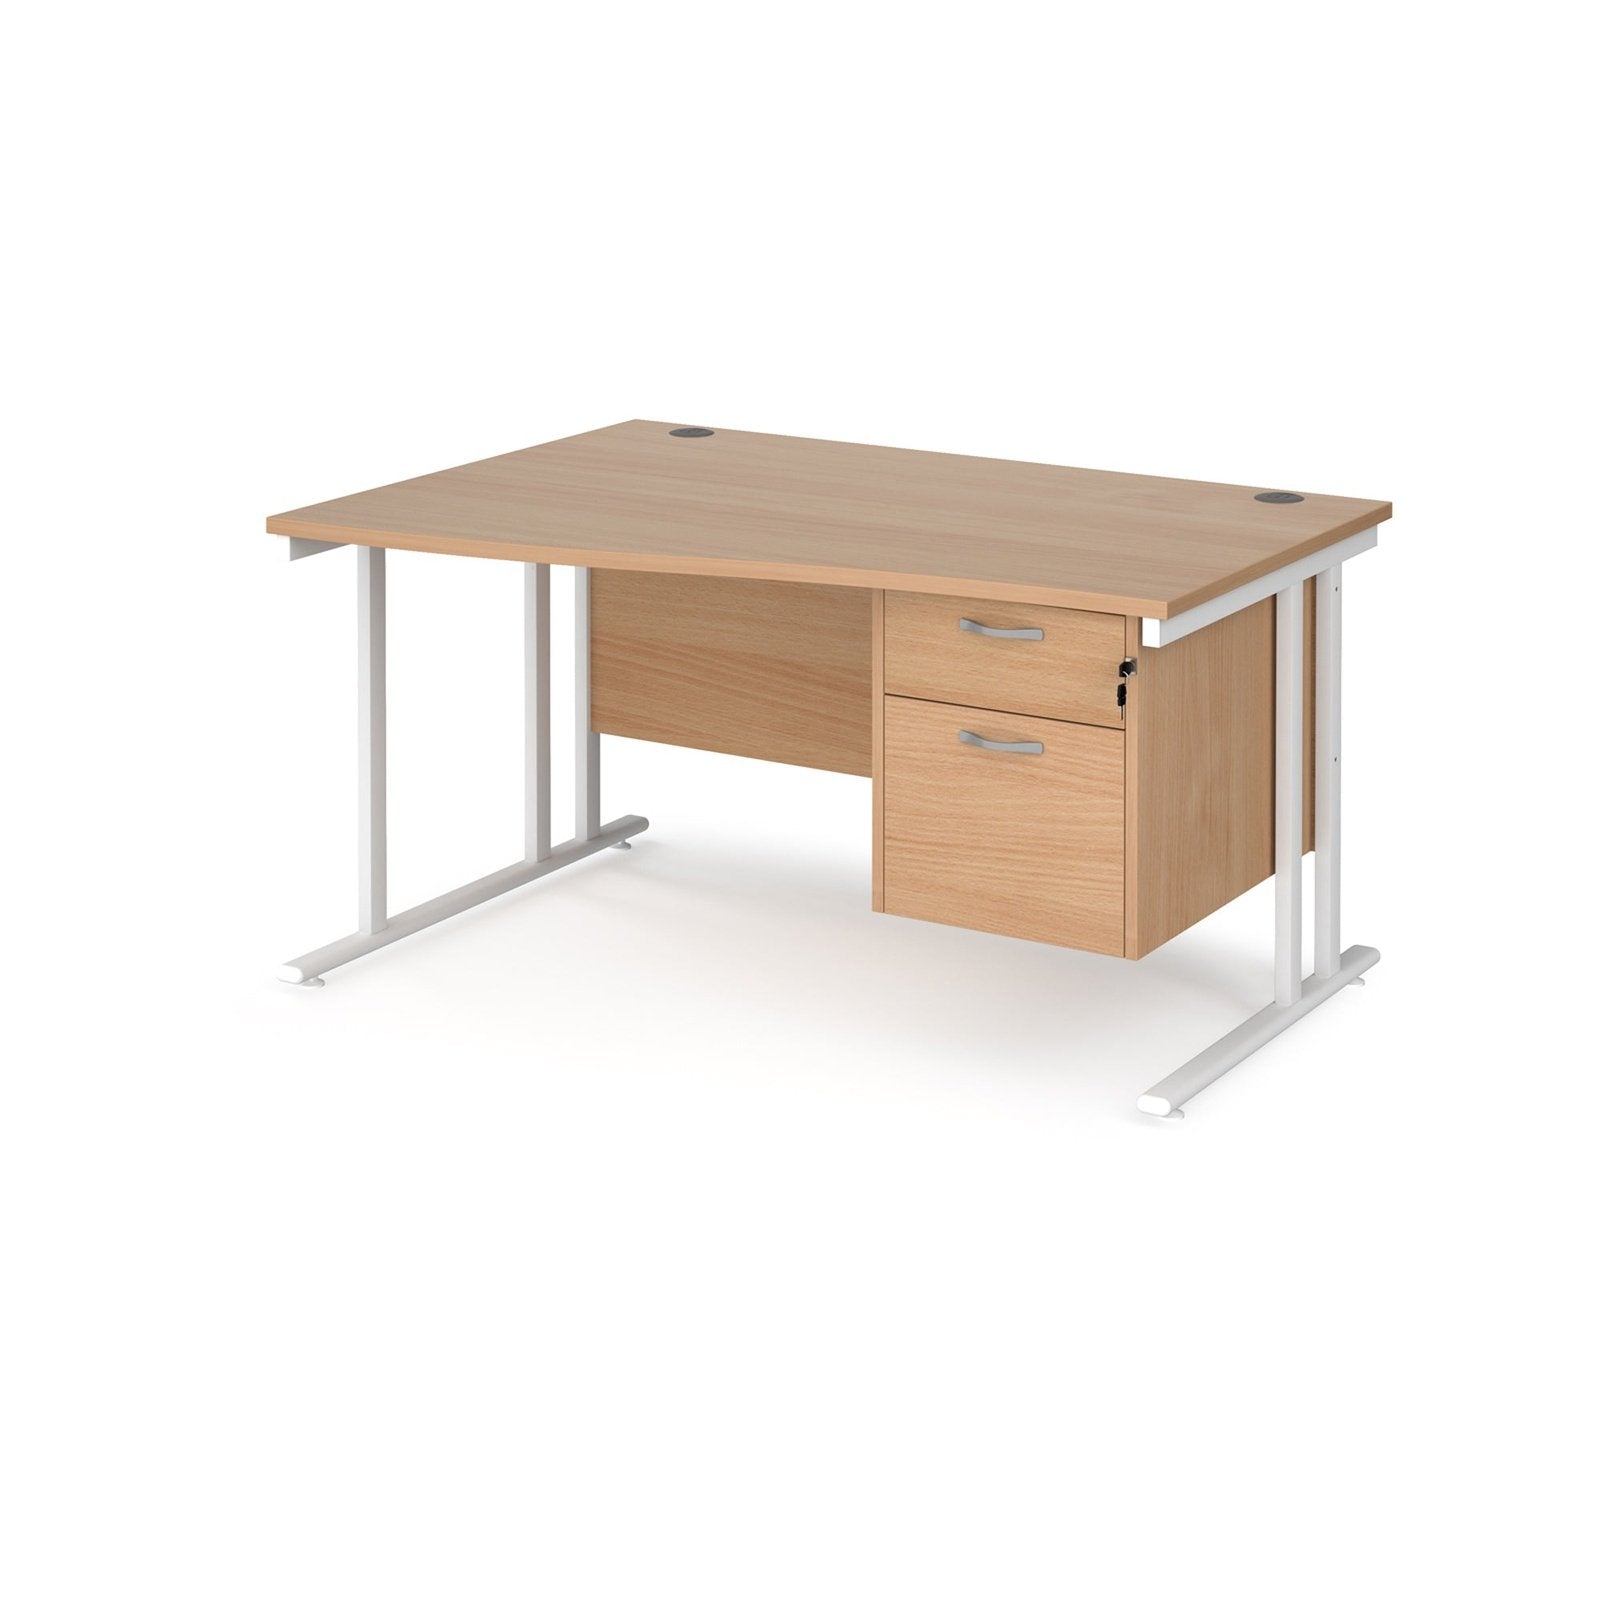 Maestro 25 cantilever leg left hand wave desk with 2 drawer pedestal - Office Products Online